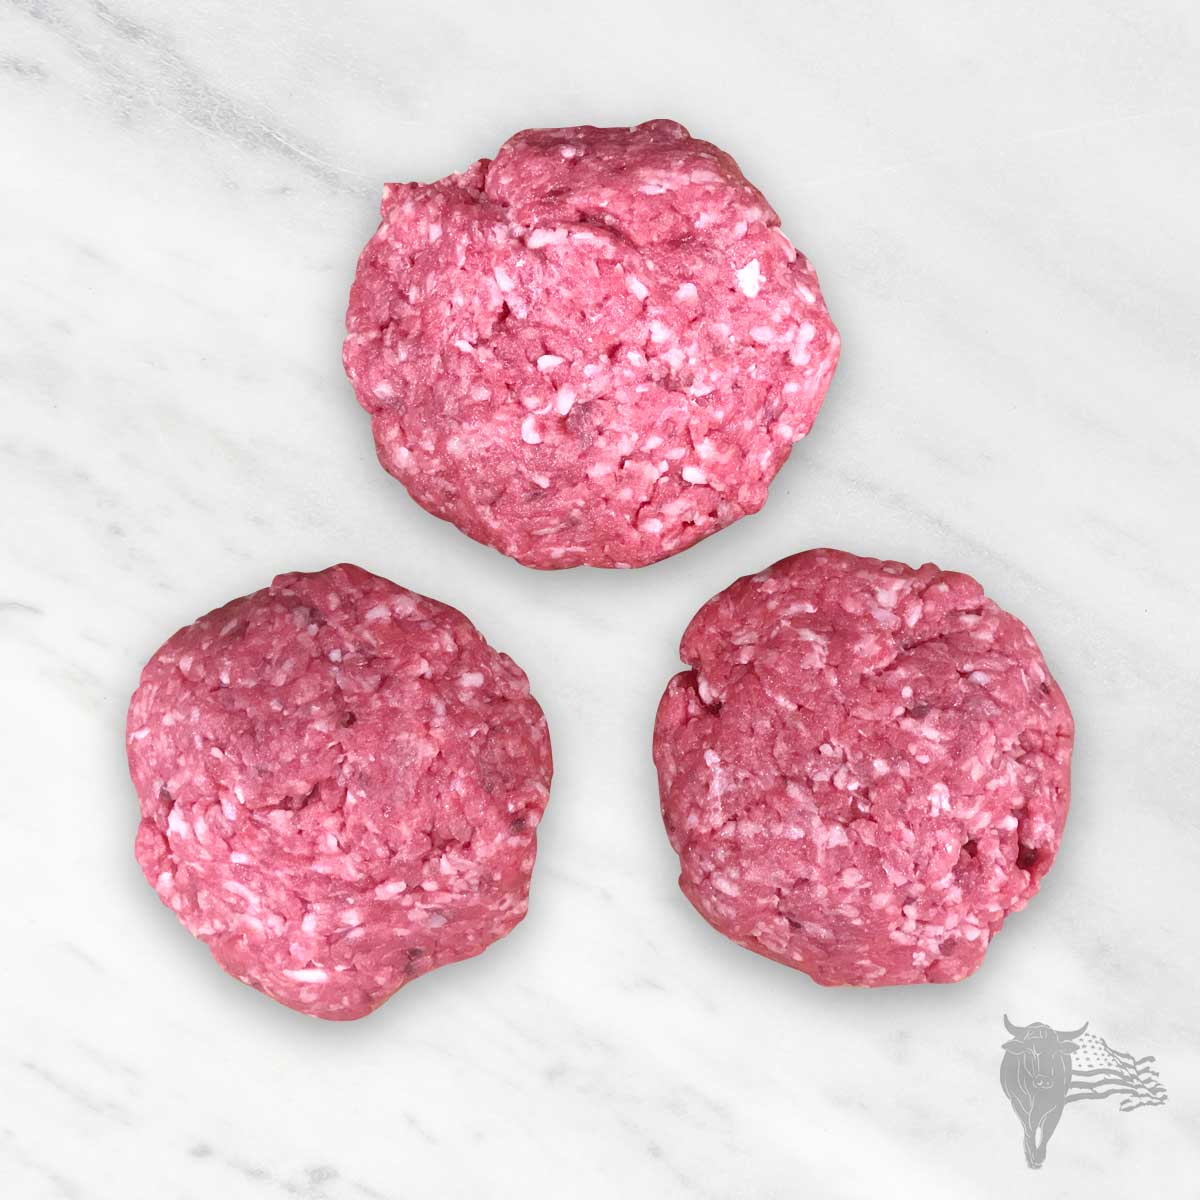 Buy Pre-portioned US Wagyu Burger Online | River Wagyu